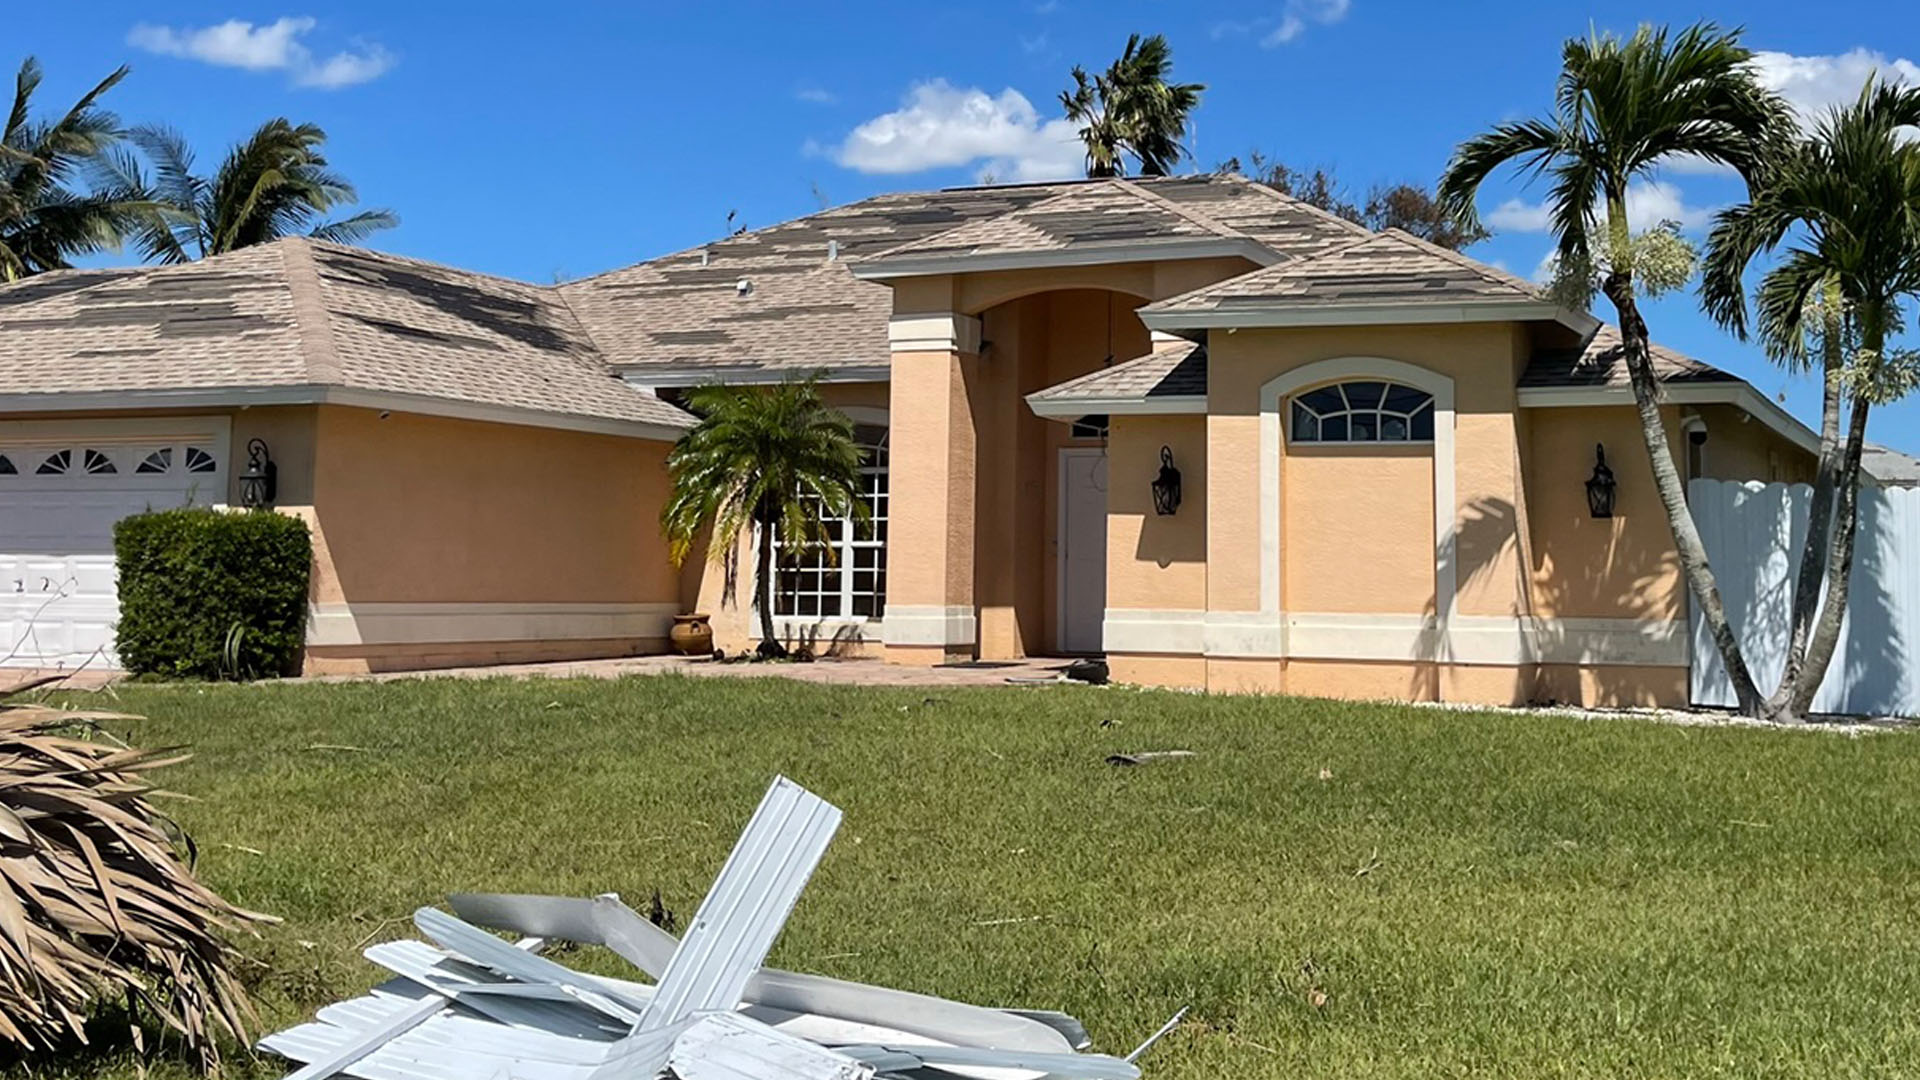 How long do I have to file a damage claim with my insurance company after a hurricane in Florida?